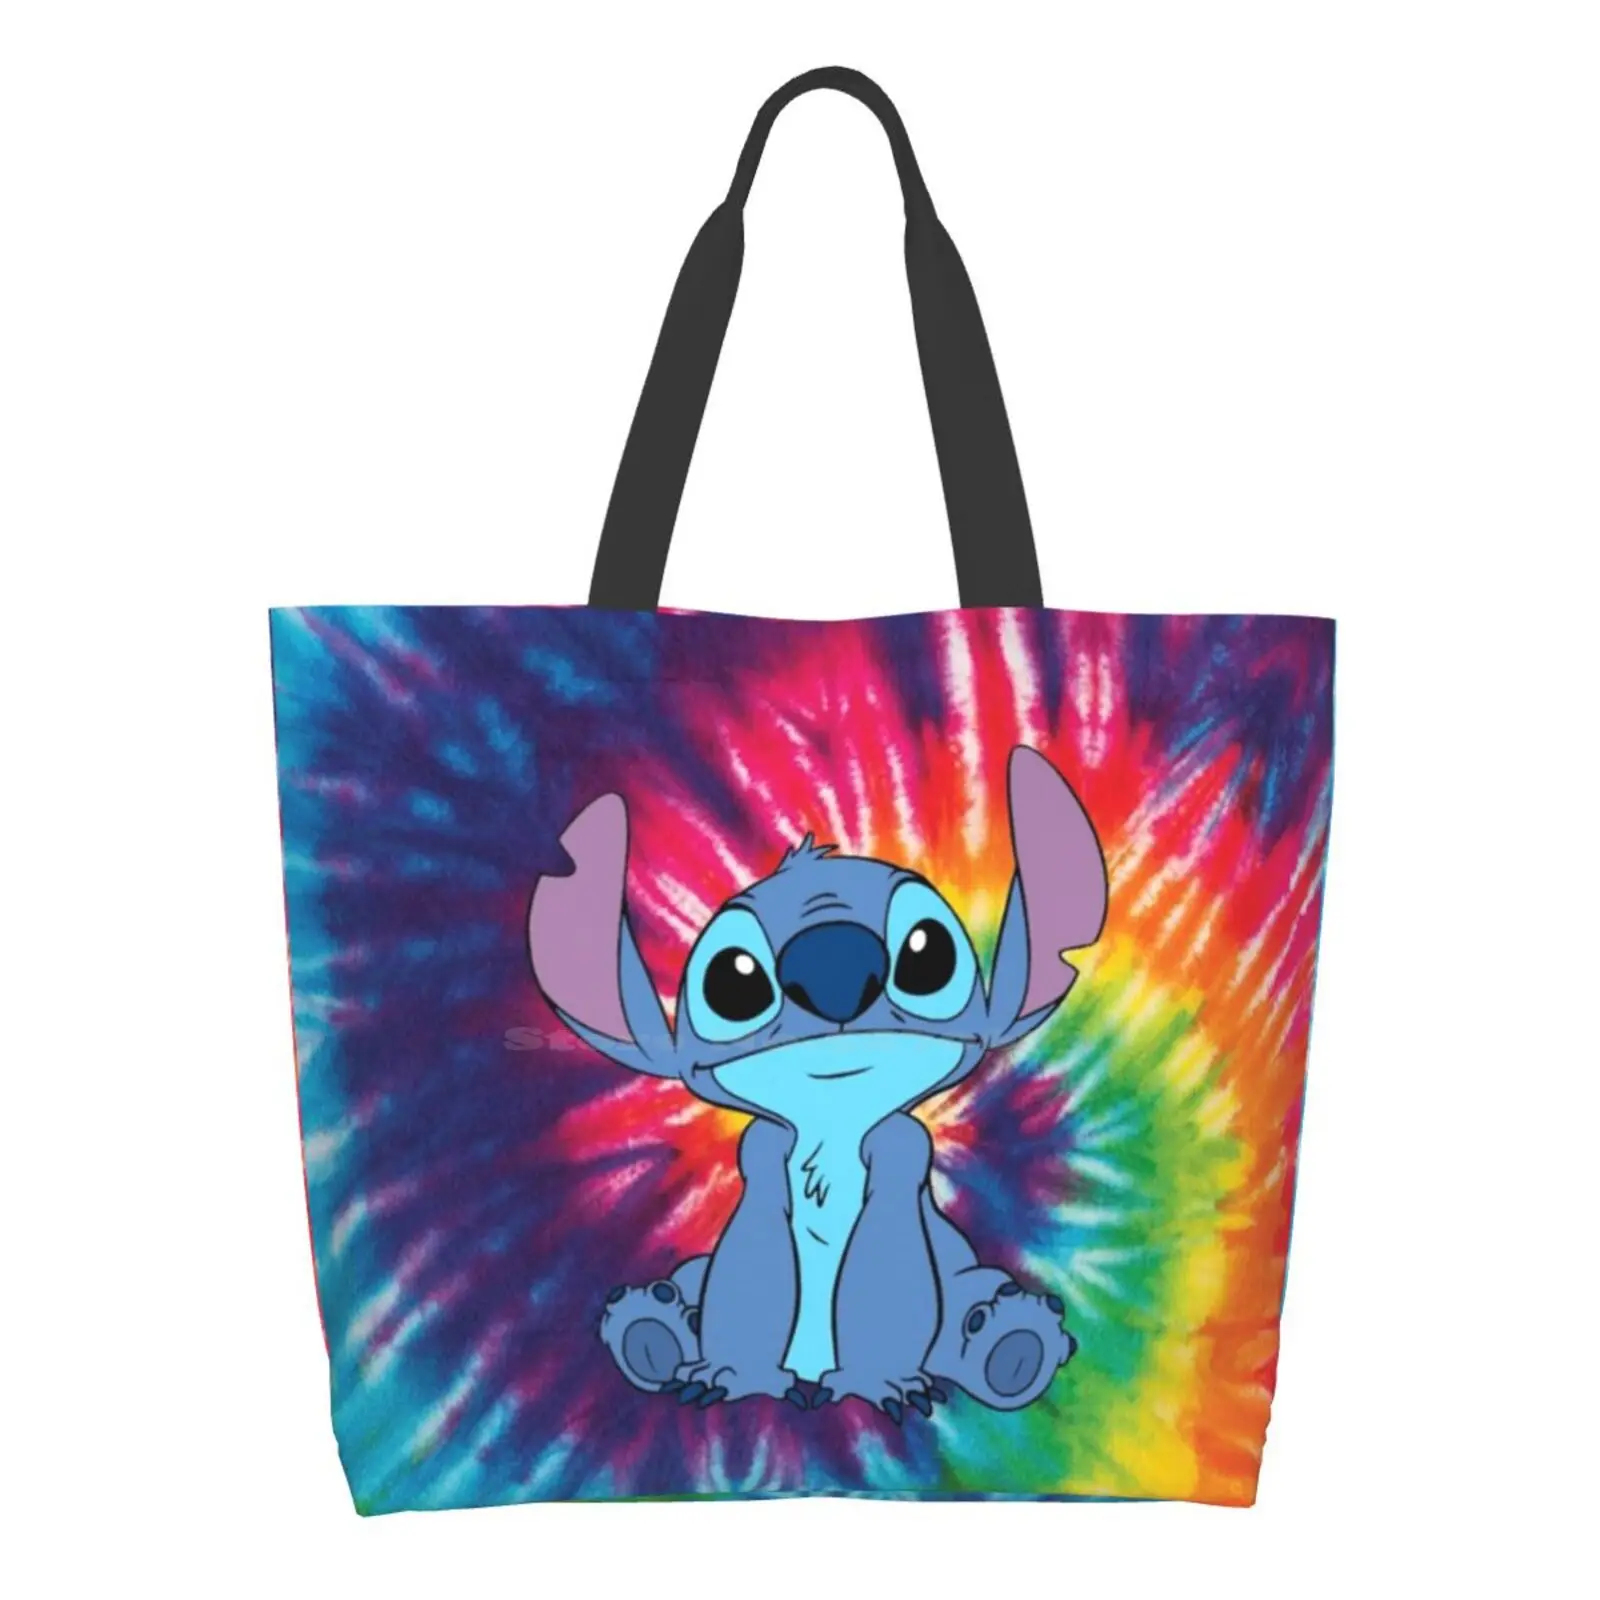 

Women Shopping Bag Girl Tote Large Size Lilo And Cute Lilo Ohana Blue Tumblr Family Hawaii Love Adorable Flower Music Aesthetic